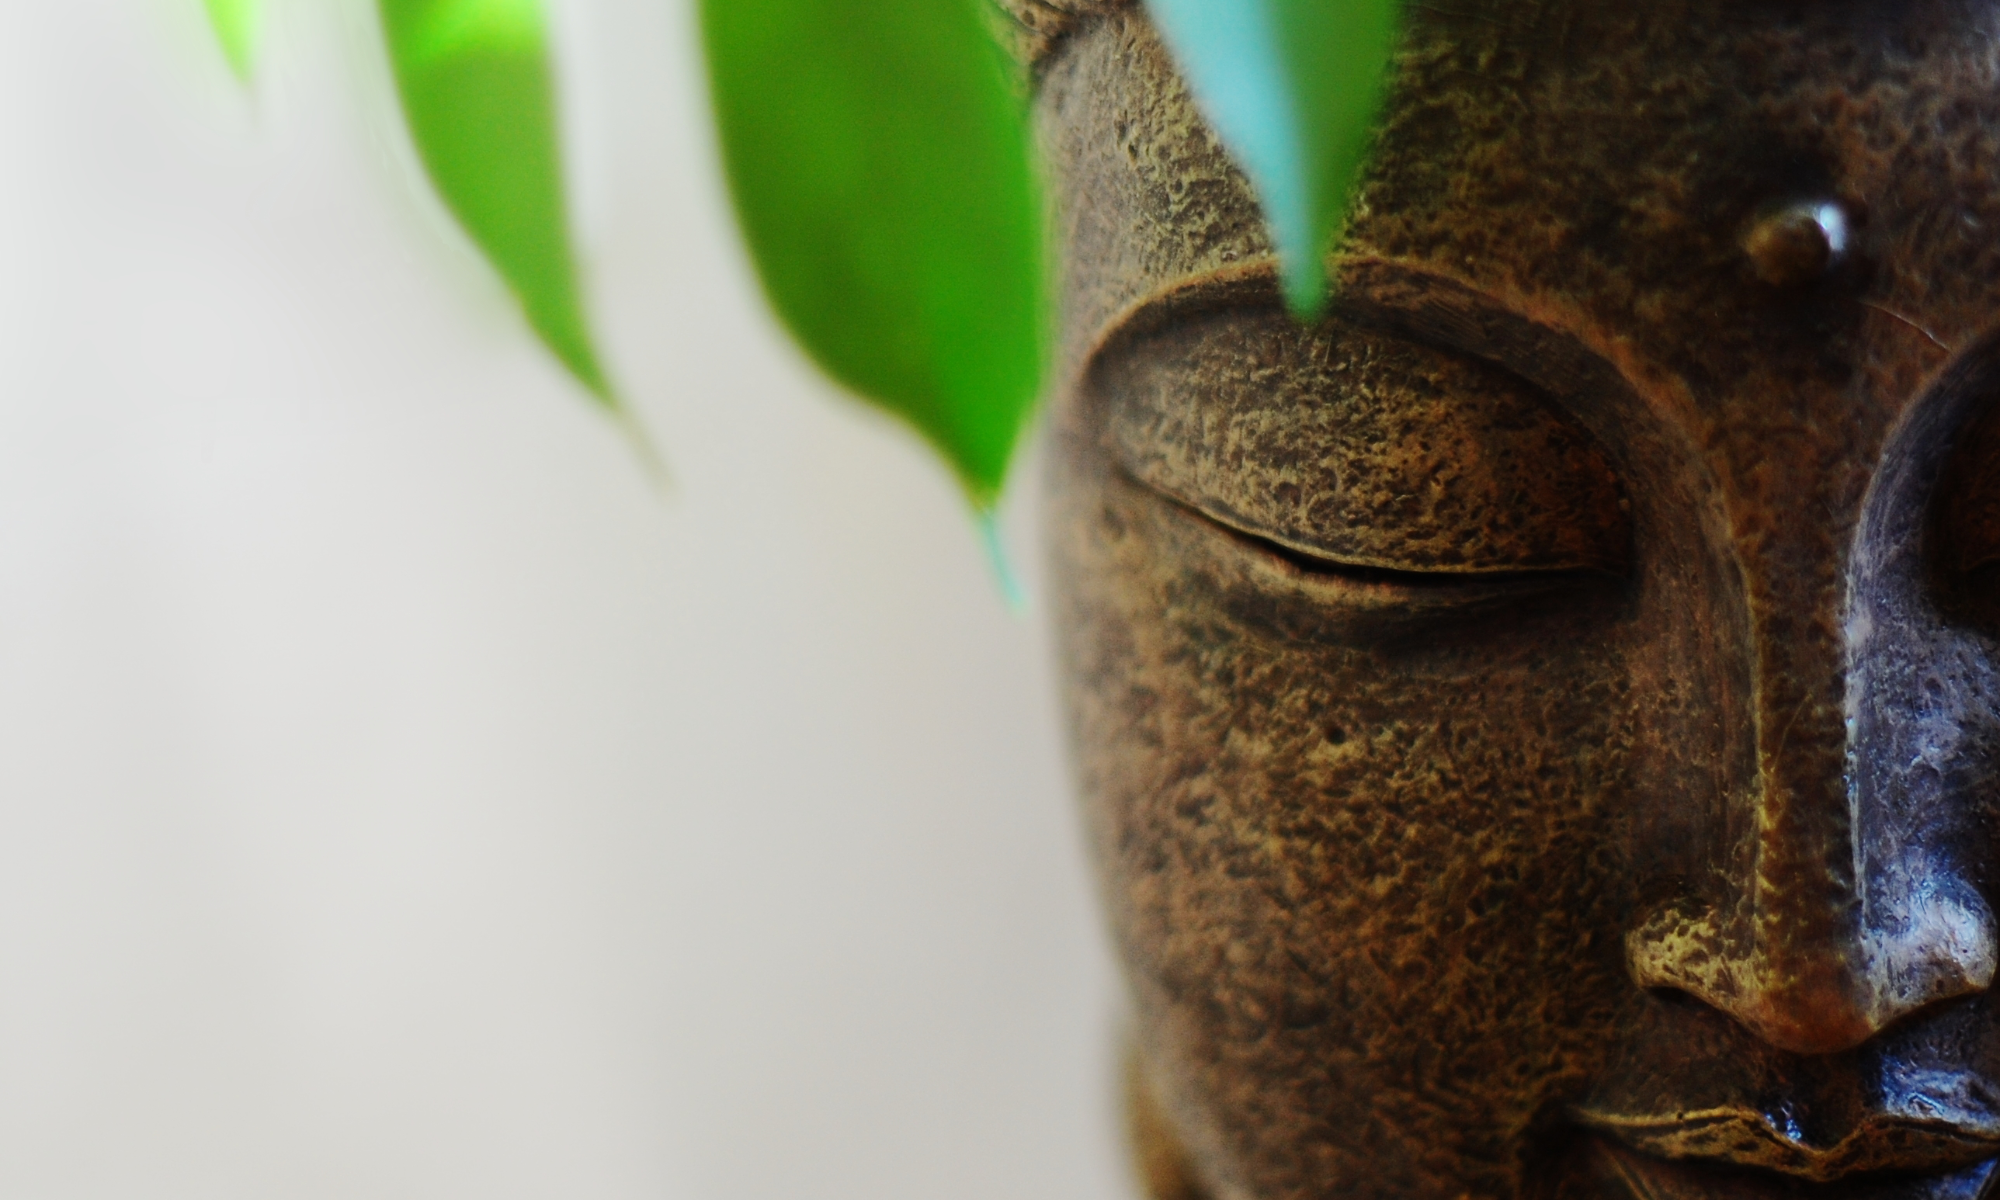 Buddha head statue with leaves